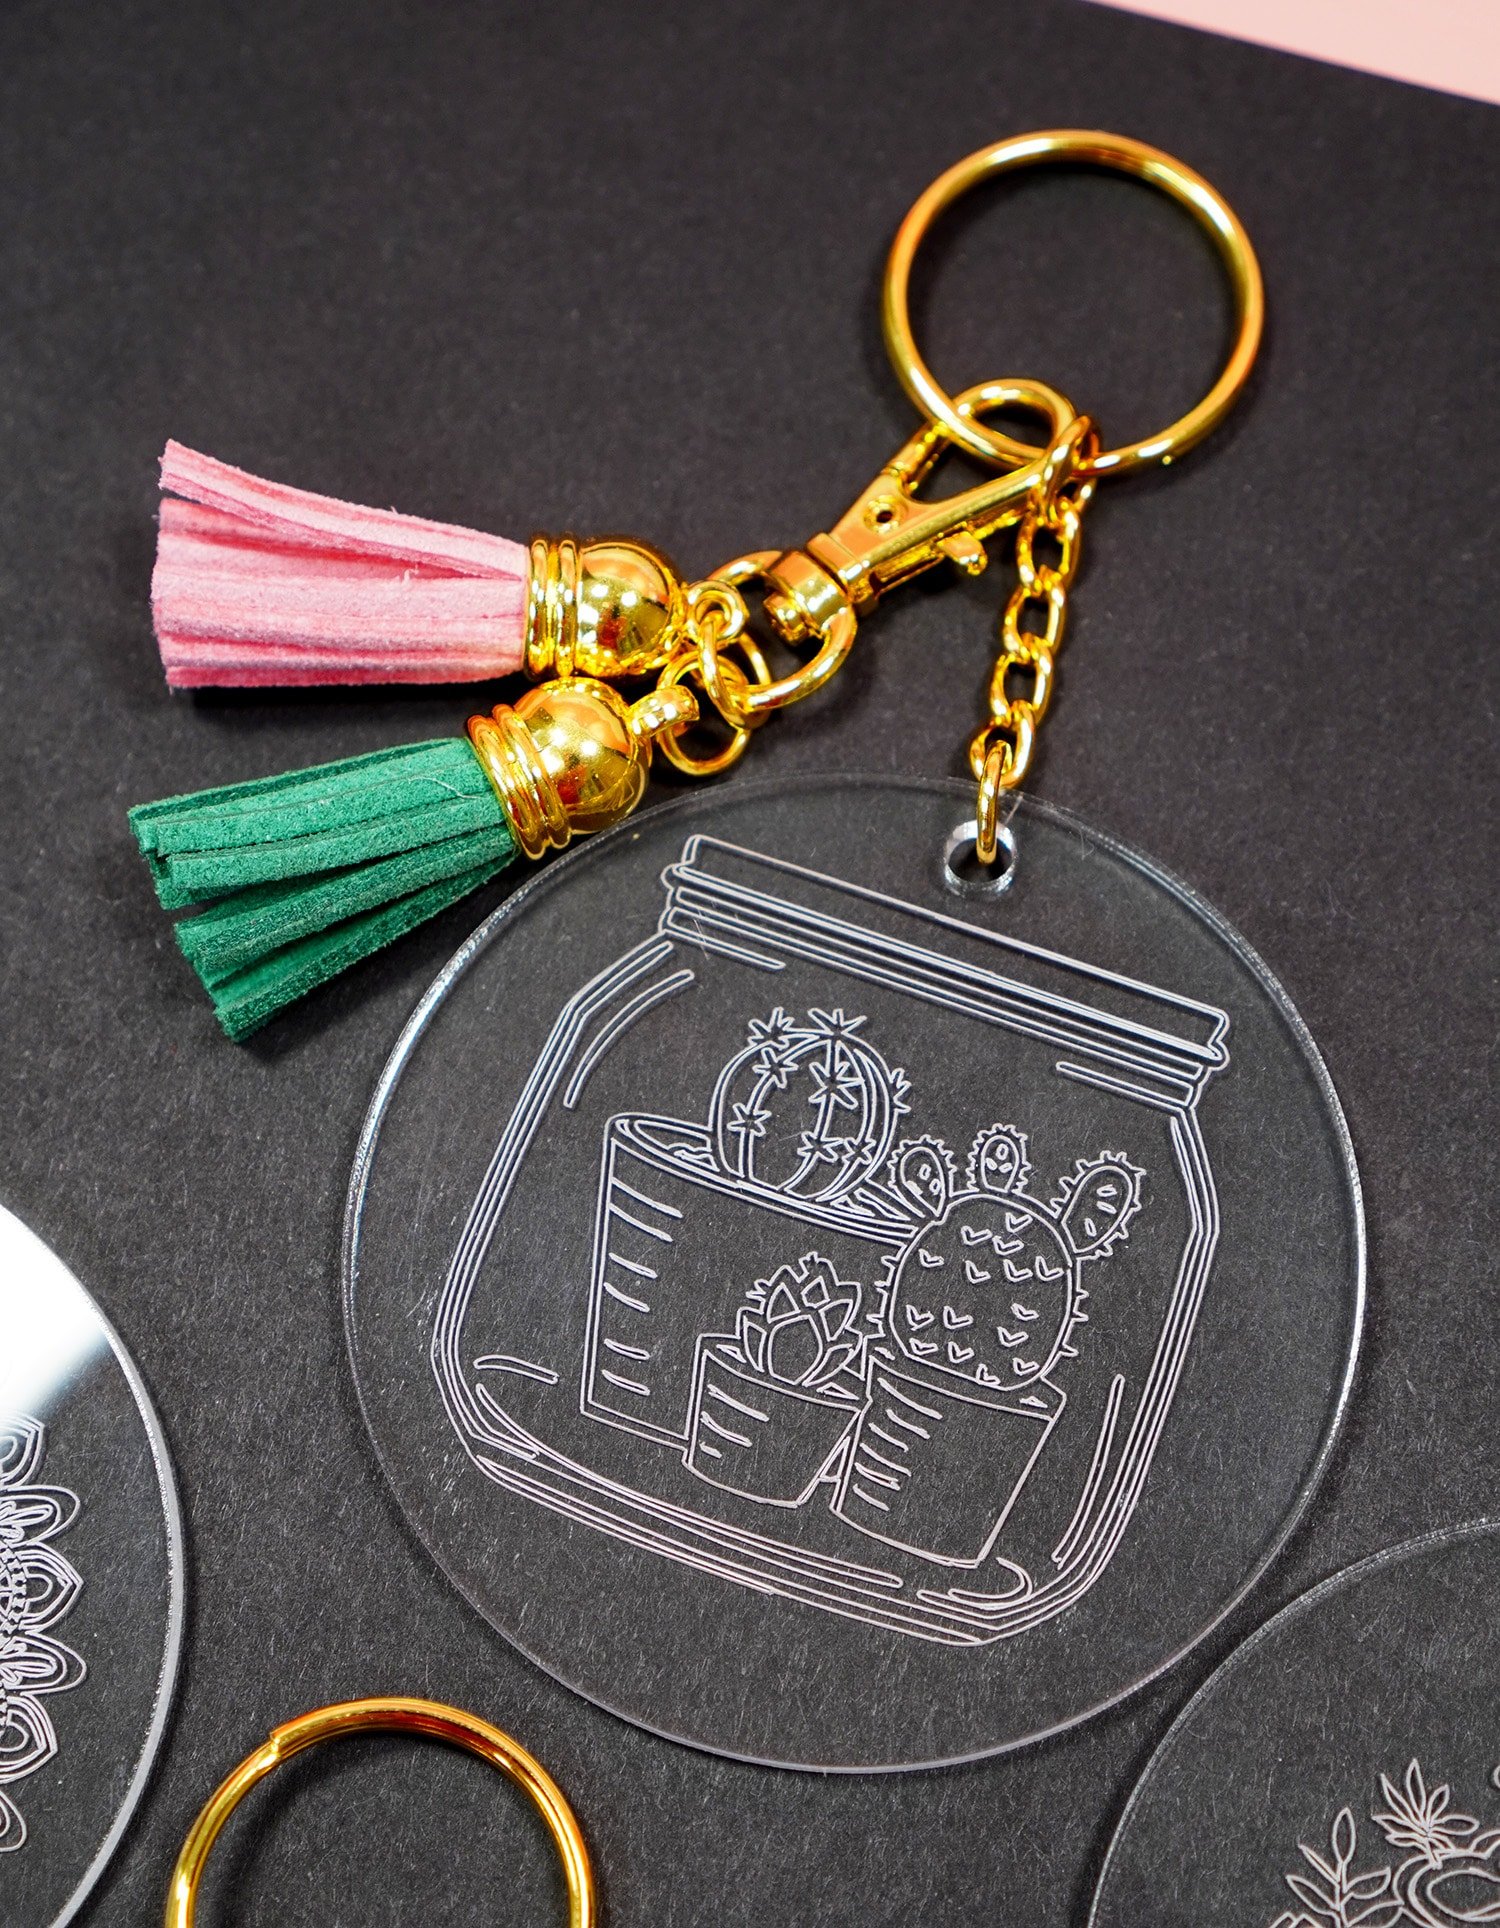 Cactus engraved acrylic keychain made with Cricut Maker Engraving Tool